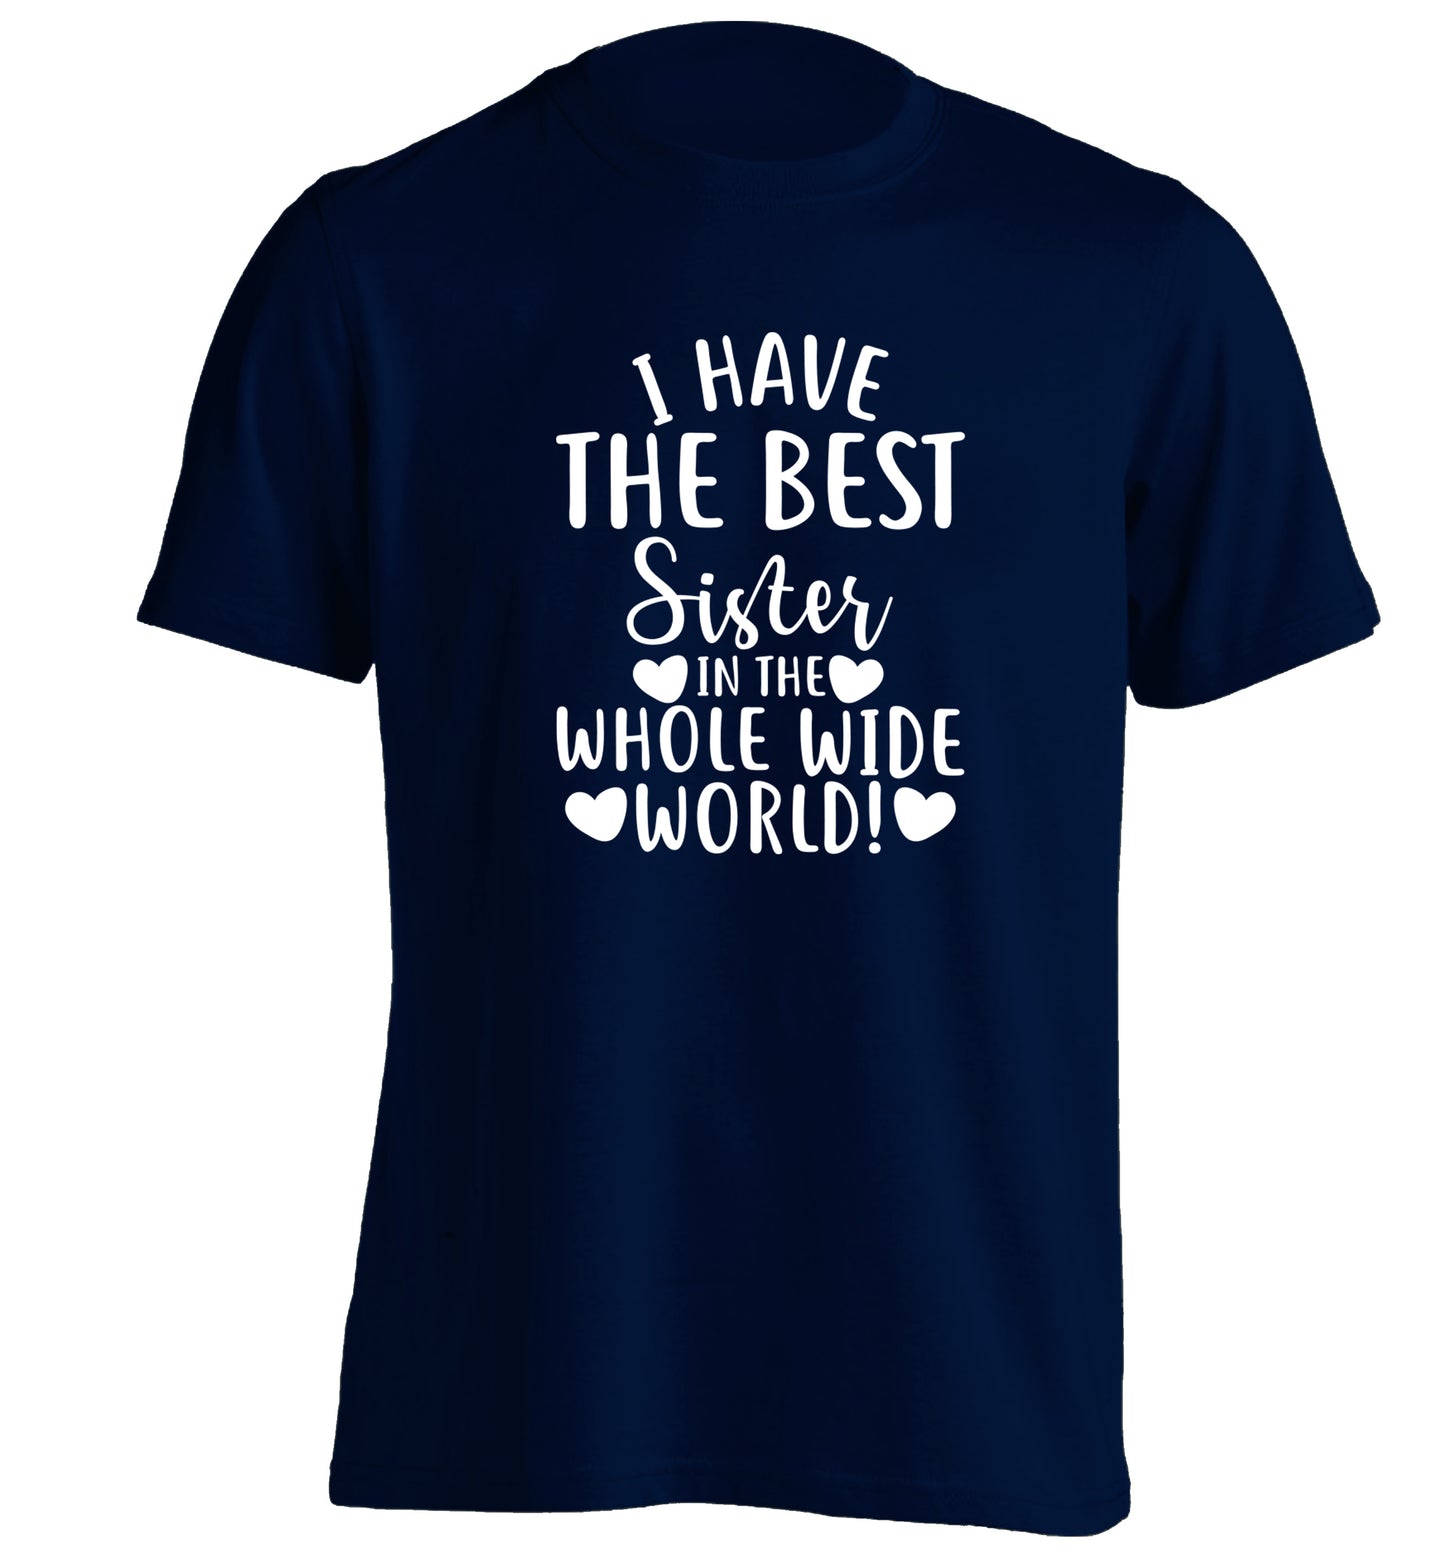 I have the best sister in the whole wide world! adults unisex navy Tshirt 2XL